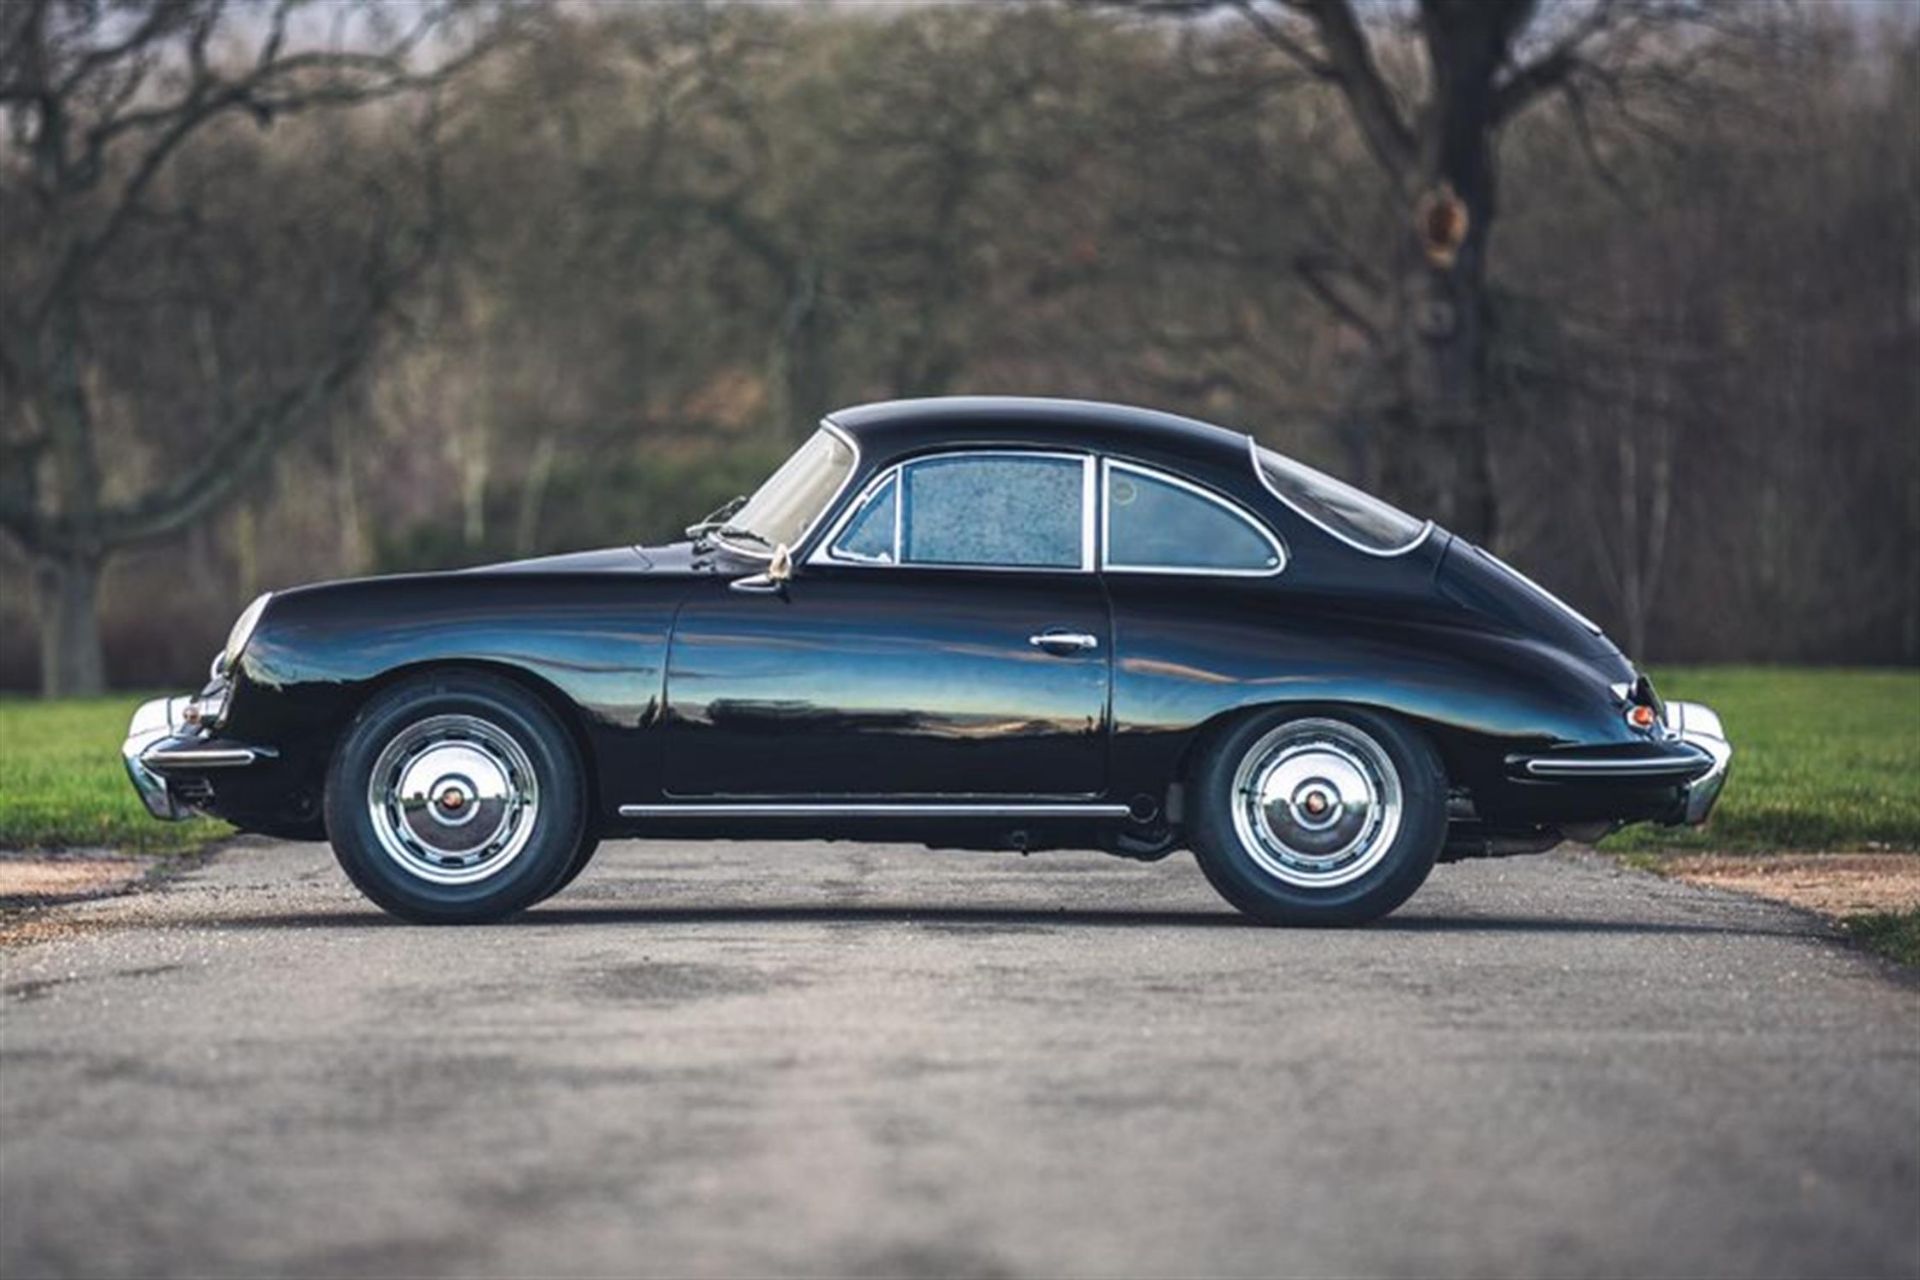 1963 Porsche 356 B T6 Coupe to ‘S’ Specification - Image 7 of 10